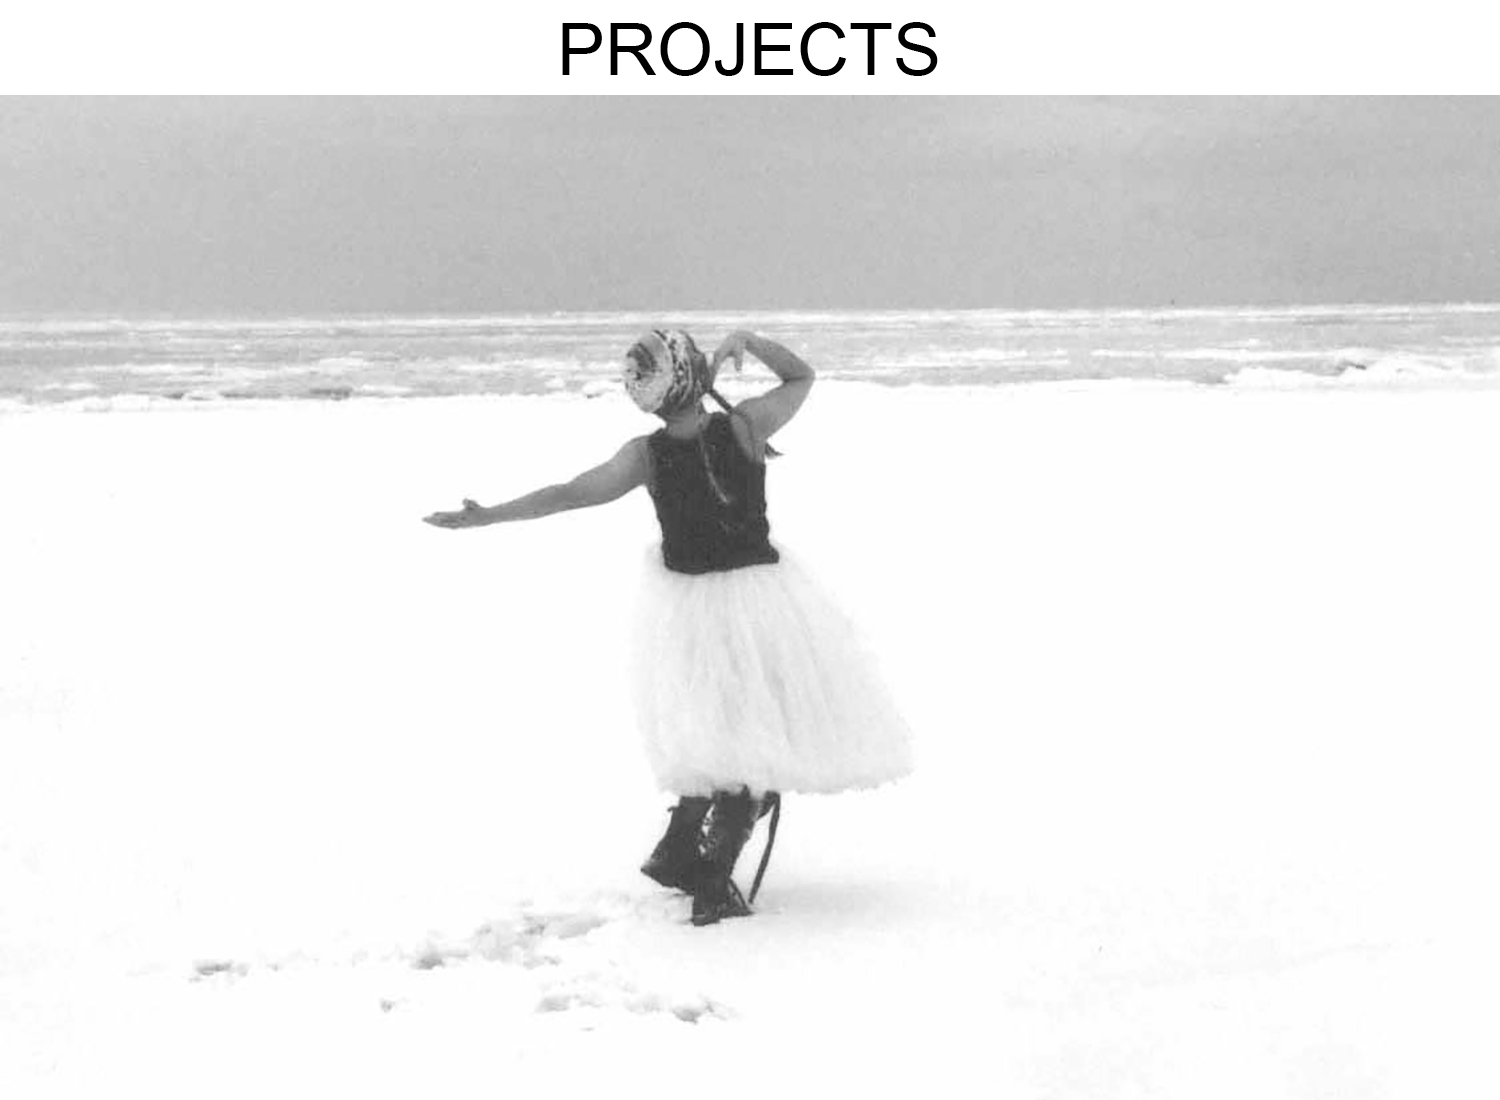 Dance projects (Synthesis - beach rehearsal)